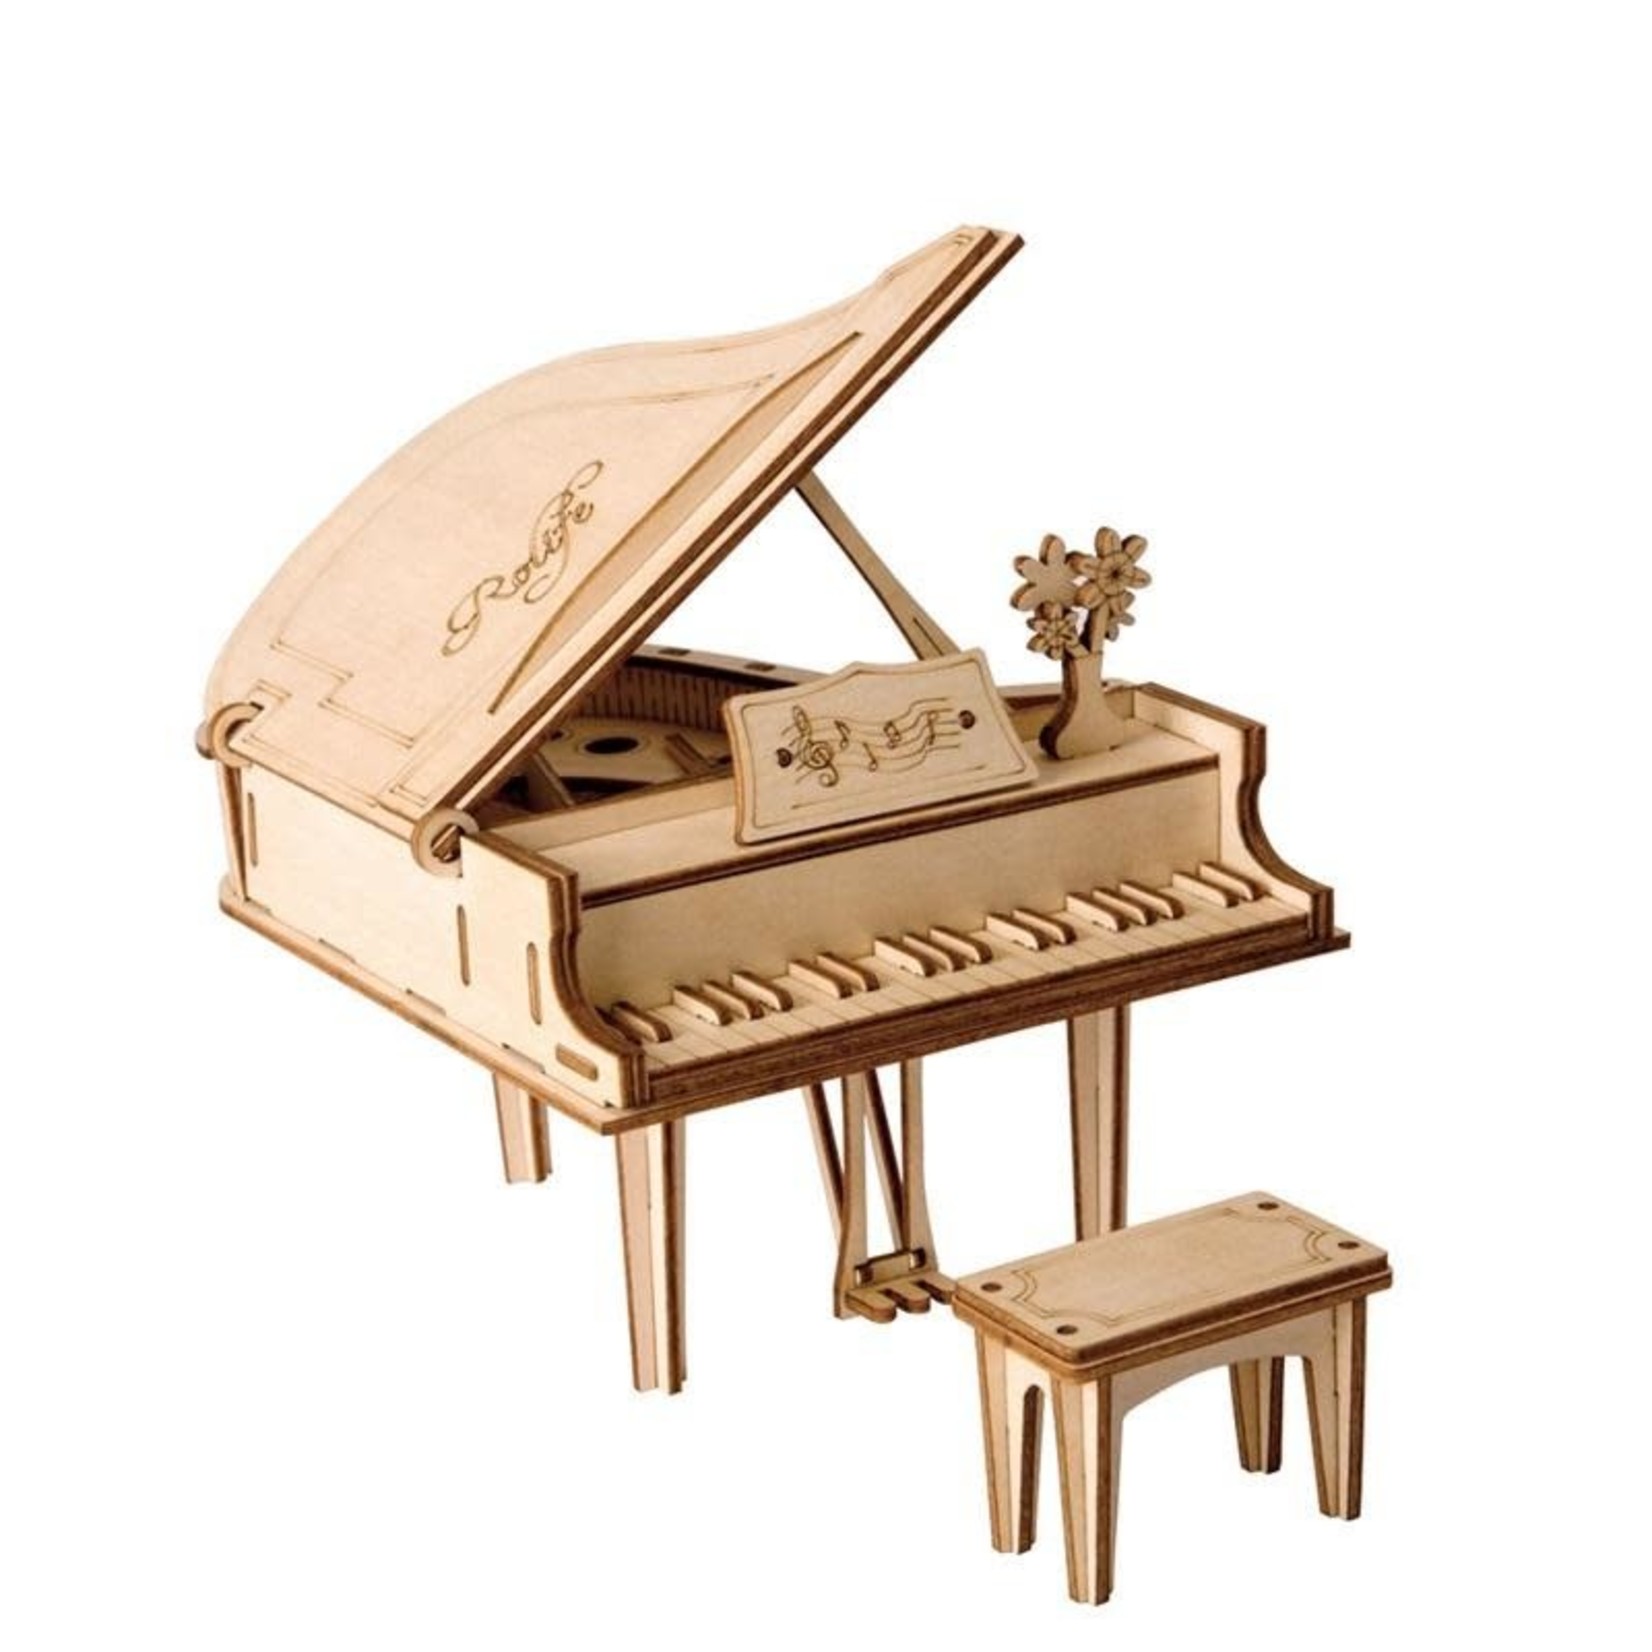 Rolife Rolife Grand Piano TG402 - 3D Wooden Puzzle Kit